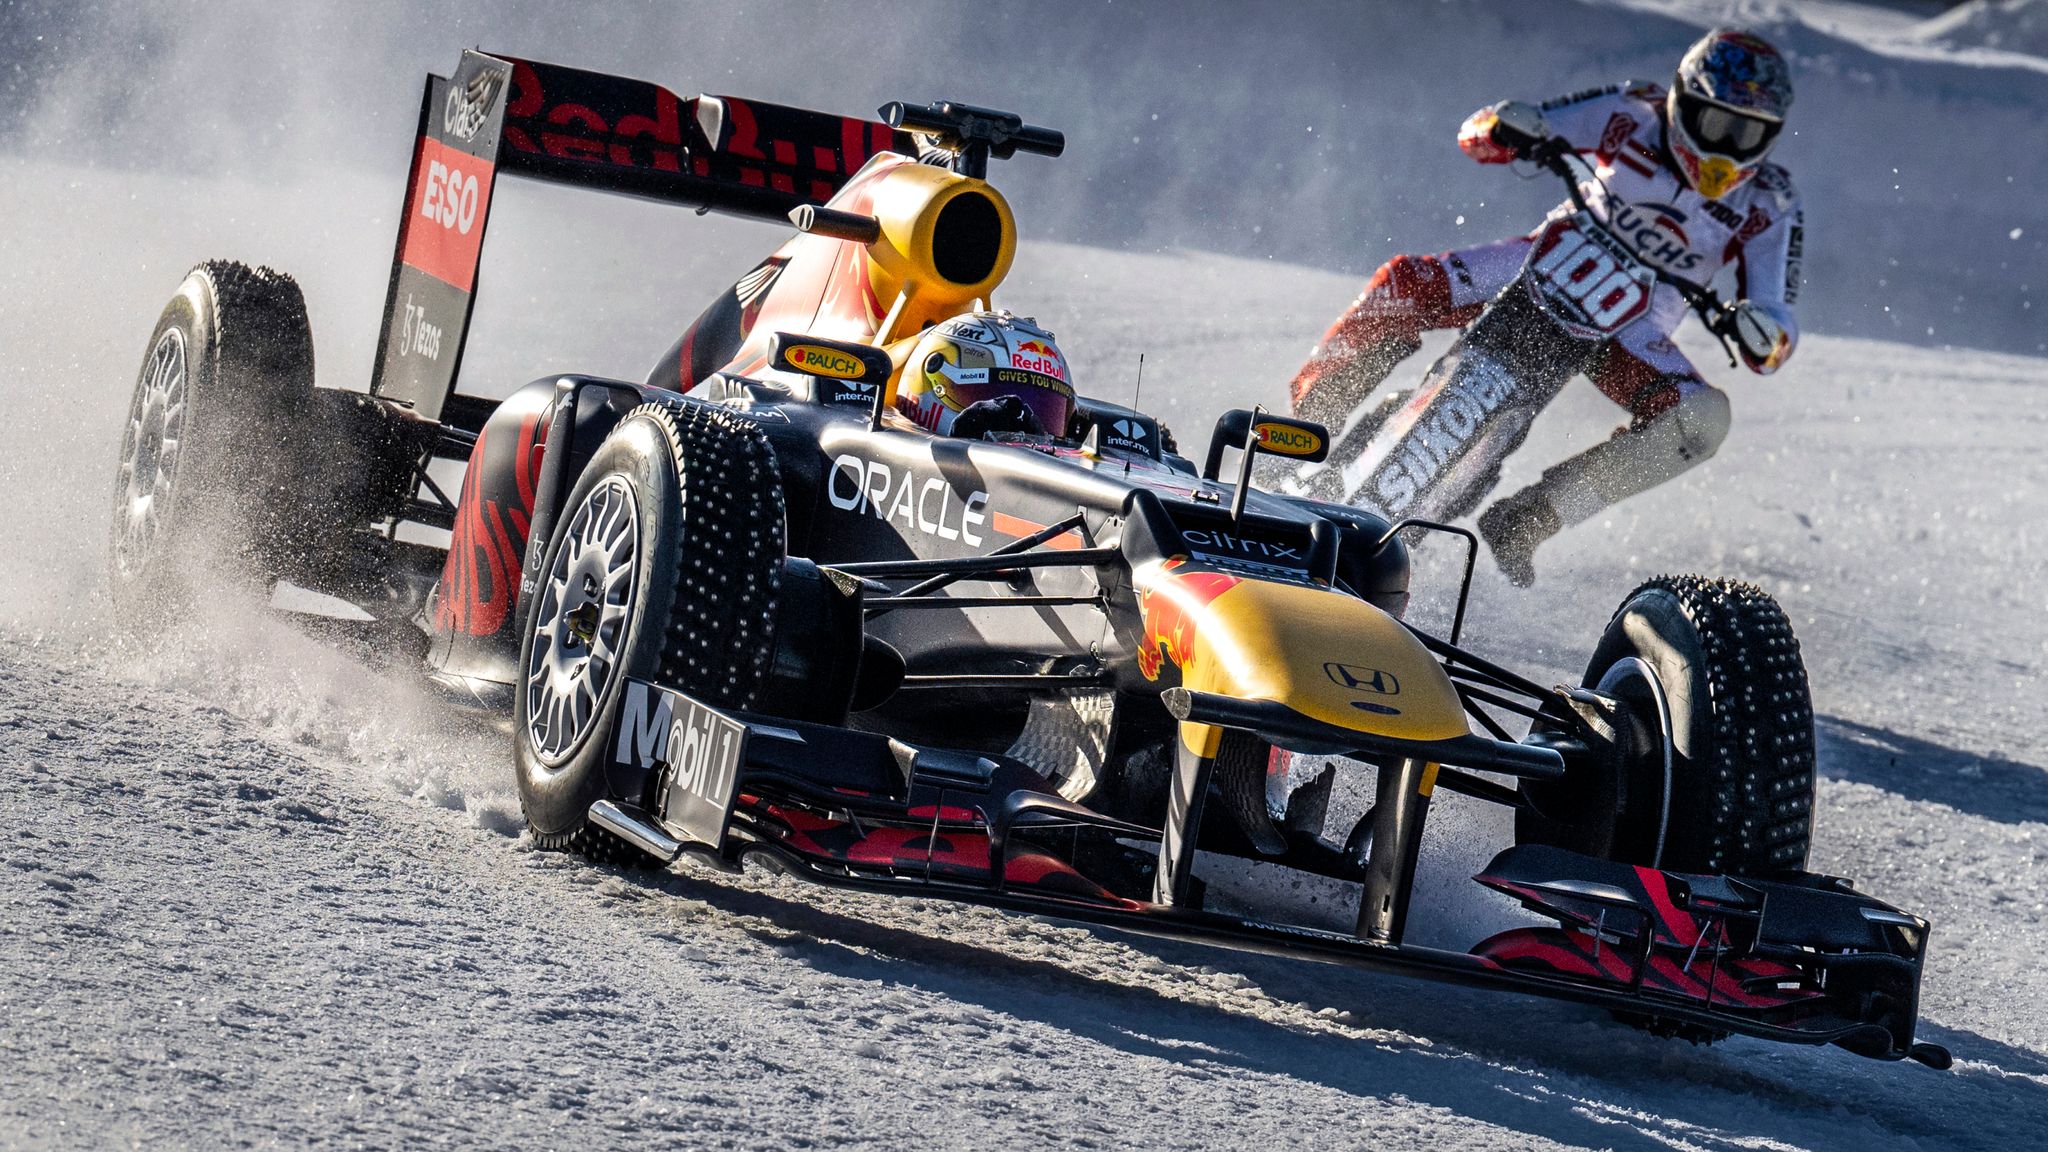 Max Verstappen completes epic F1 drive ice as Red Bull driver sets sights on retaining title in 2022 | F1